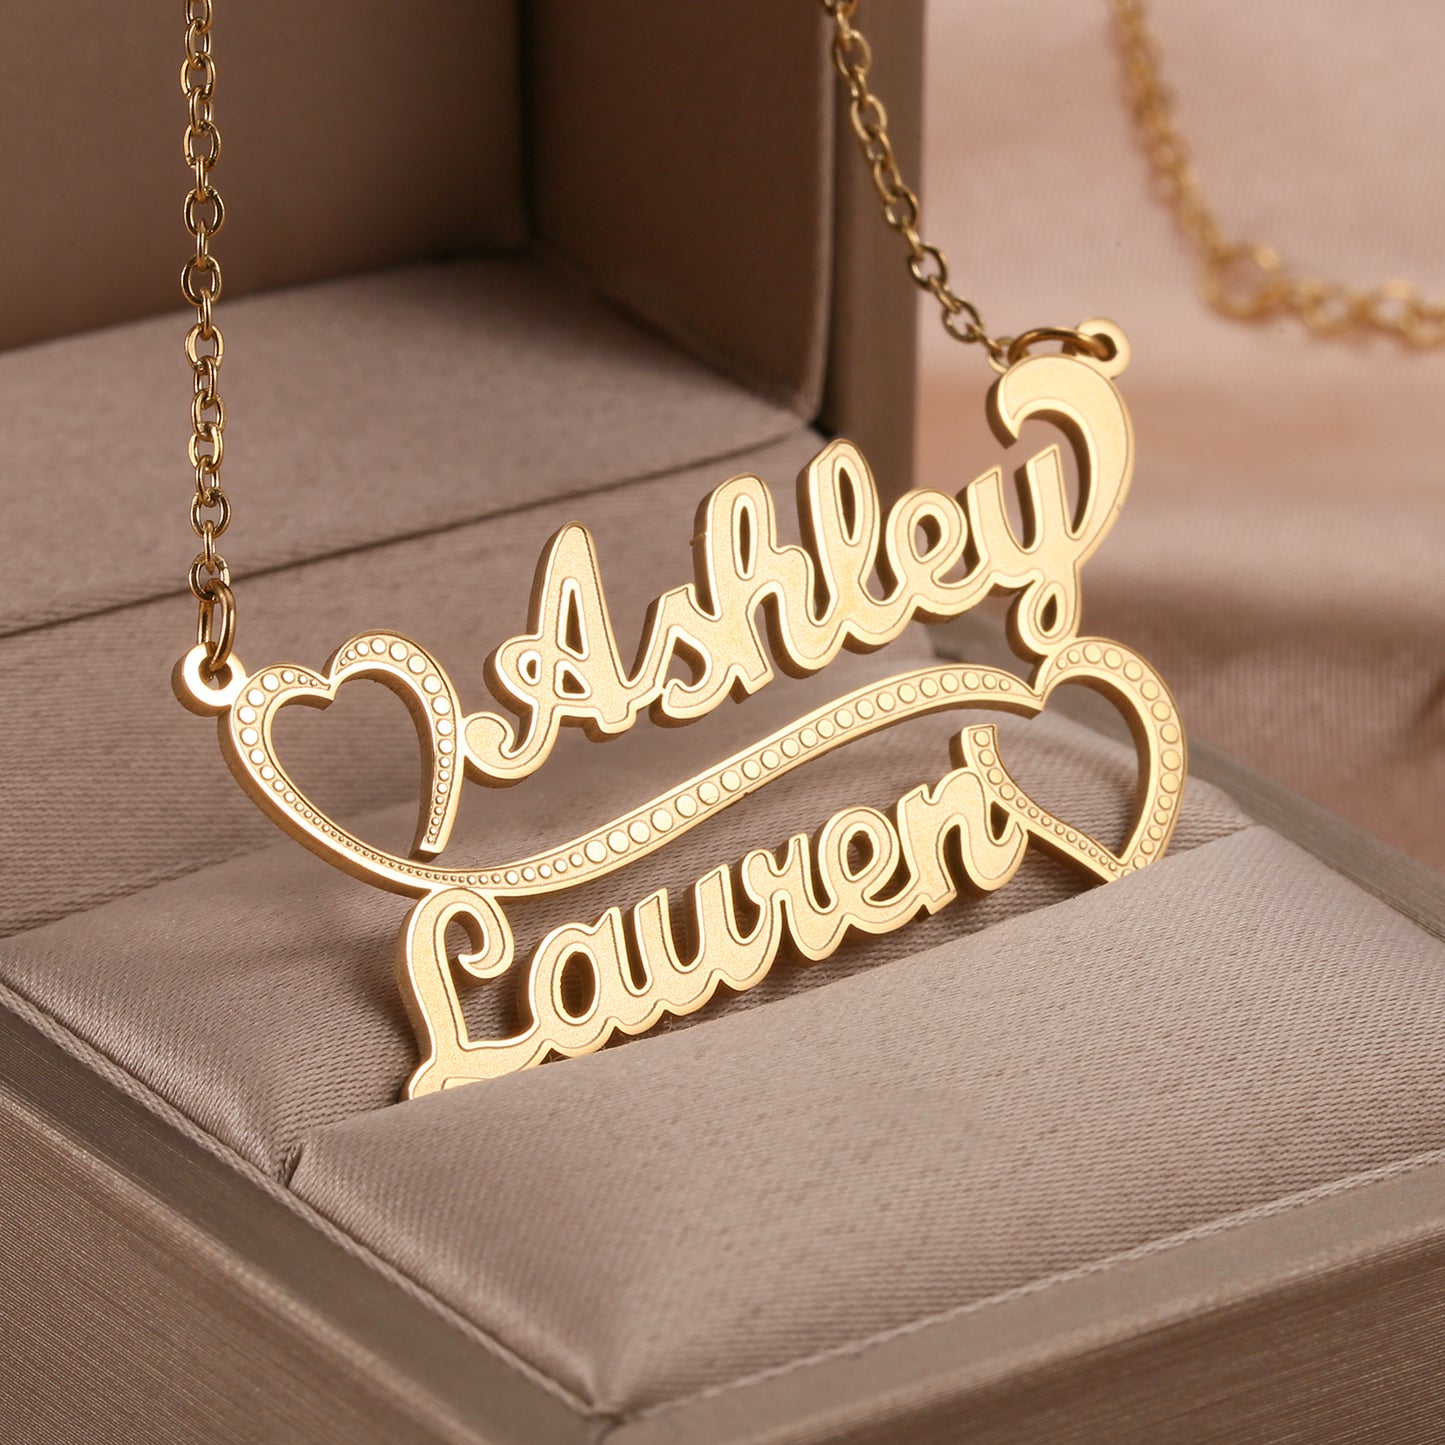 Personalised Double Name Necklace - Swirls and Love Hearts design - LIANA